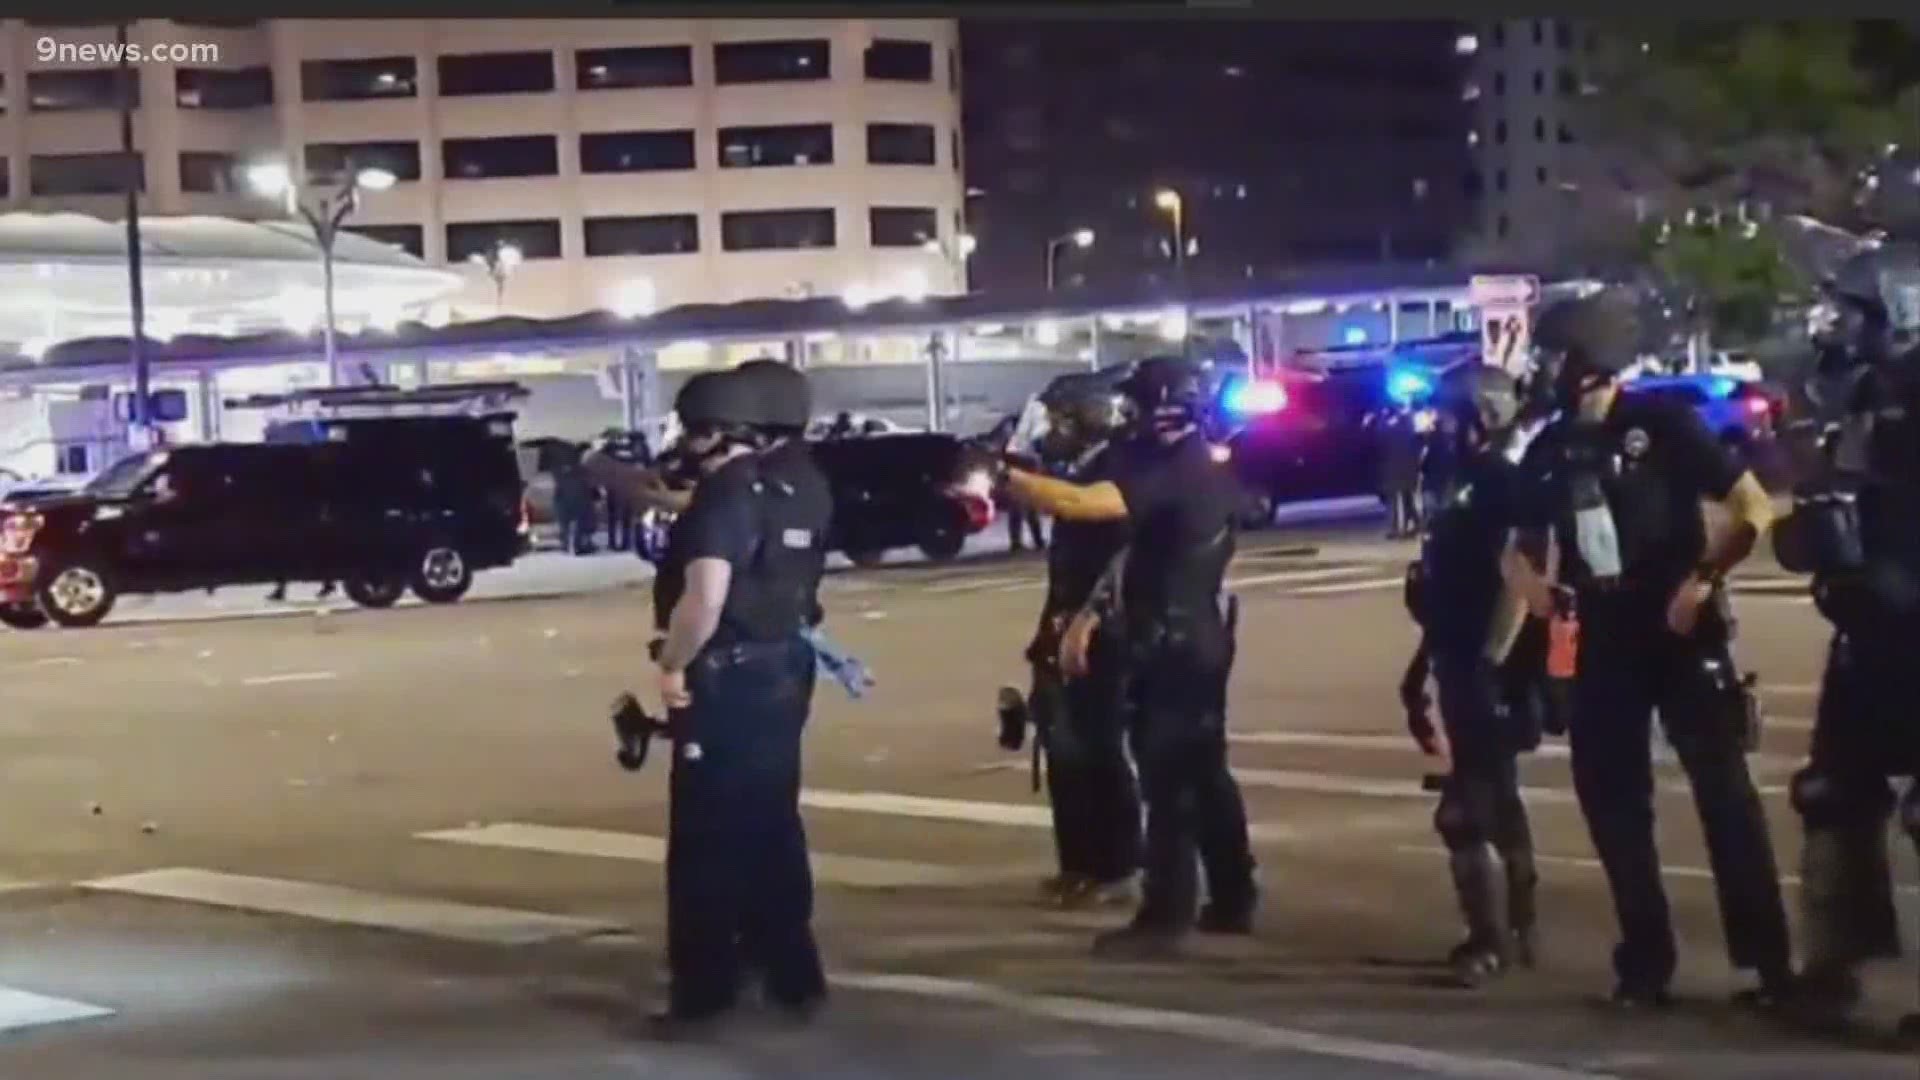 Denver City Council will host leaders from Denver Police and Denver Safety at a June 17 committee meeting to discuss the use of force at protests.